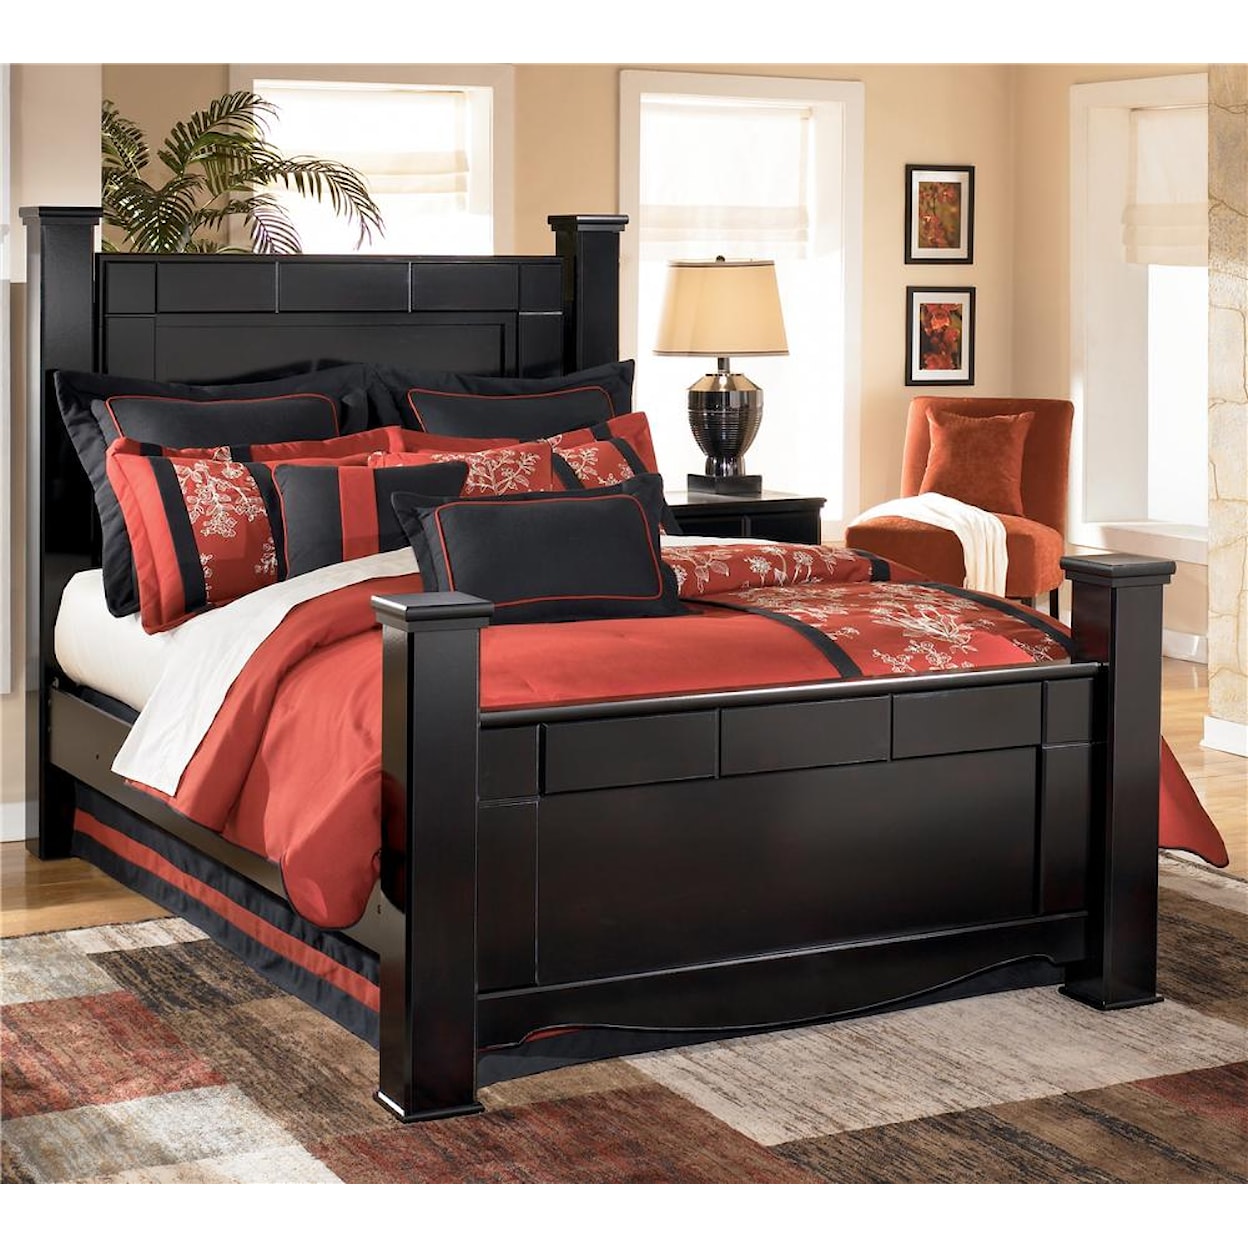 Ashley Furniture Signature Design Shay B271 King Poster Bed